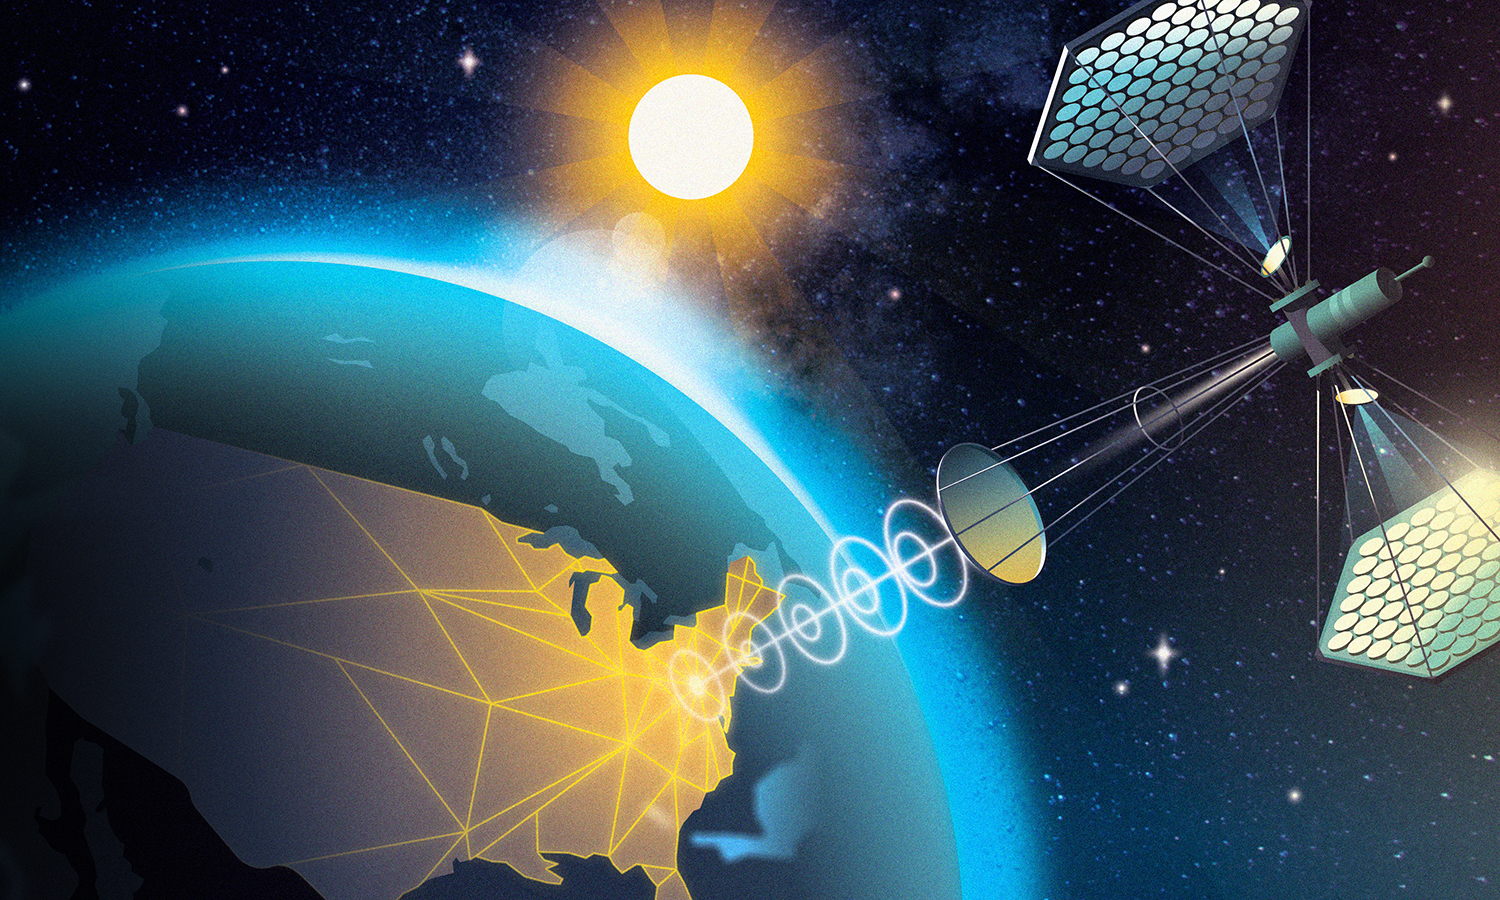 On beaming solar power from low earth orbit